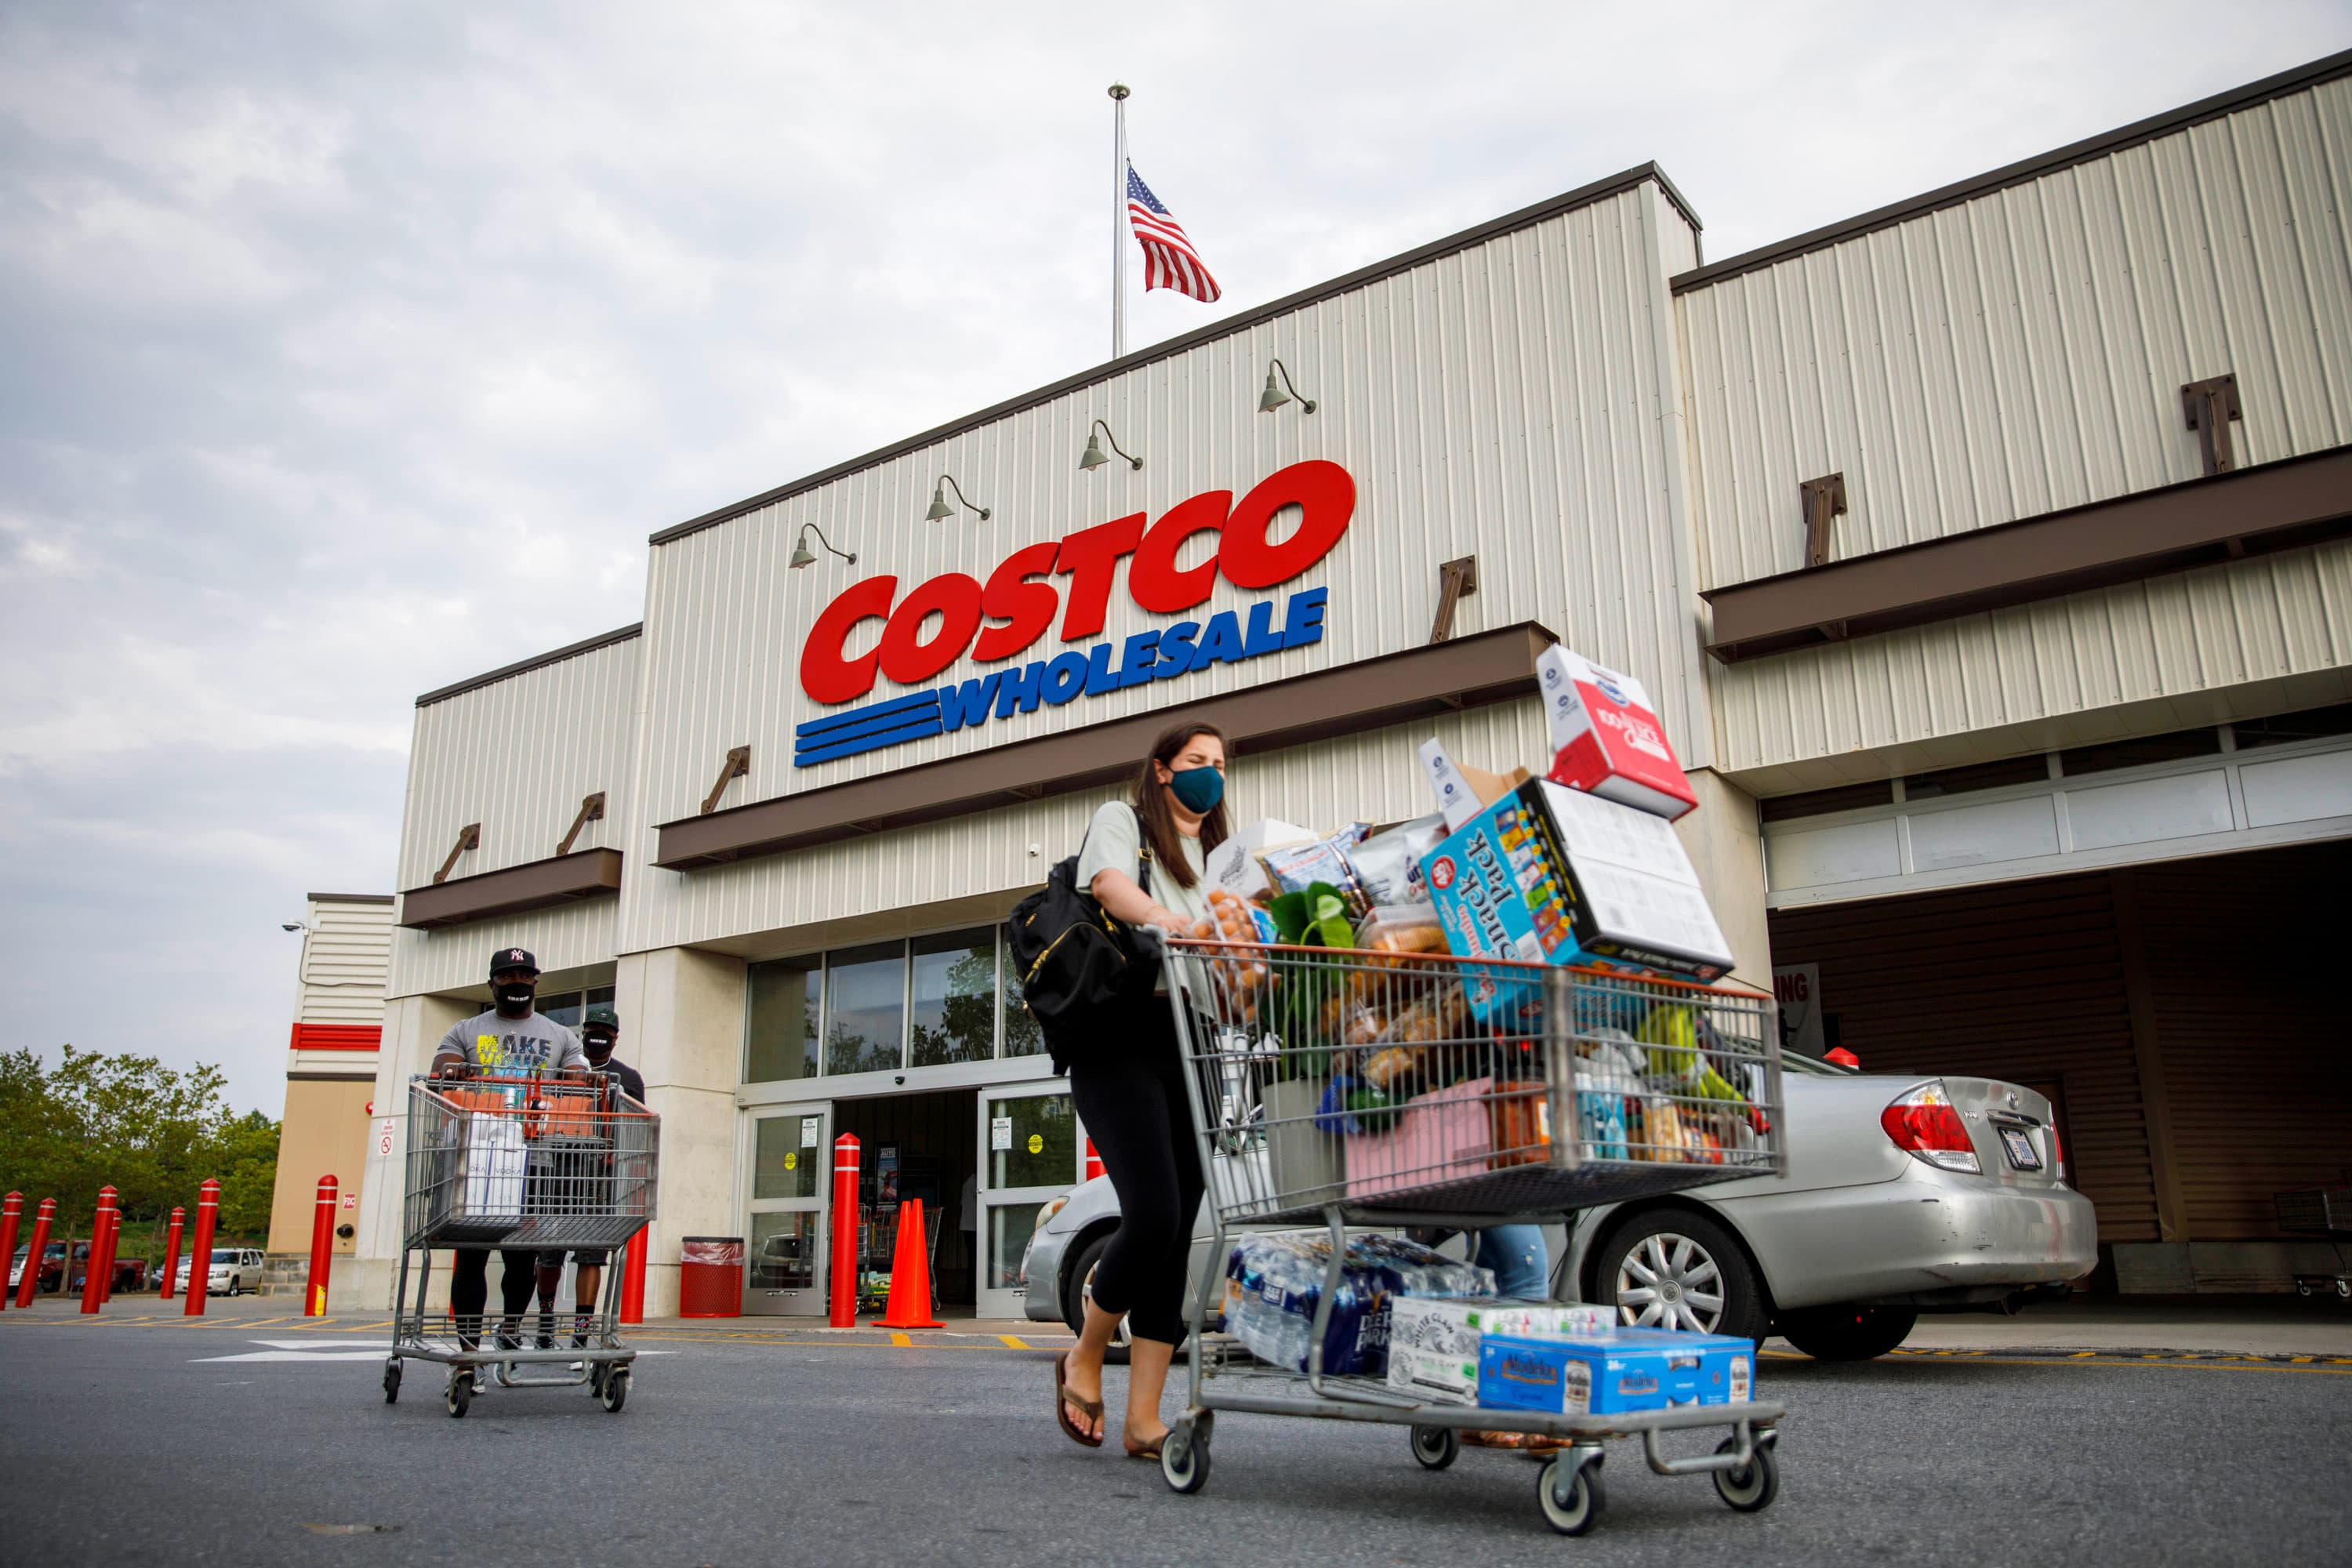 Stocks making the biggest moves midday: Costco, Rivian, Signature Bank, Sweetgreen and more